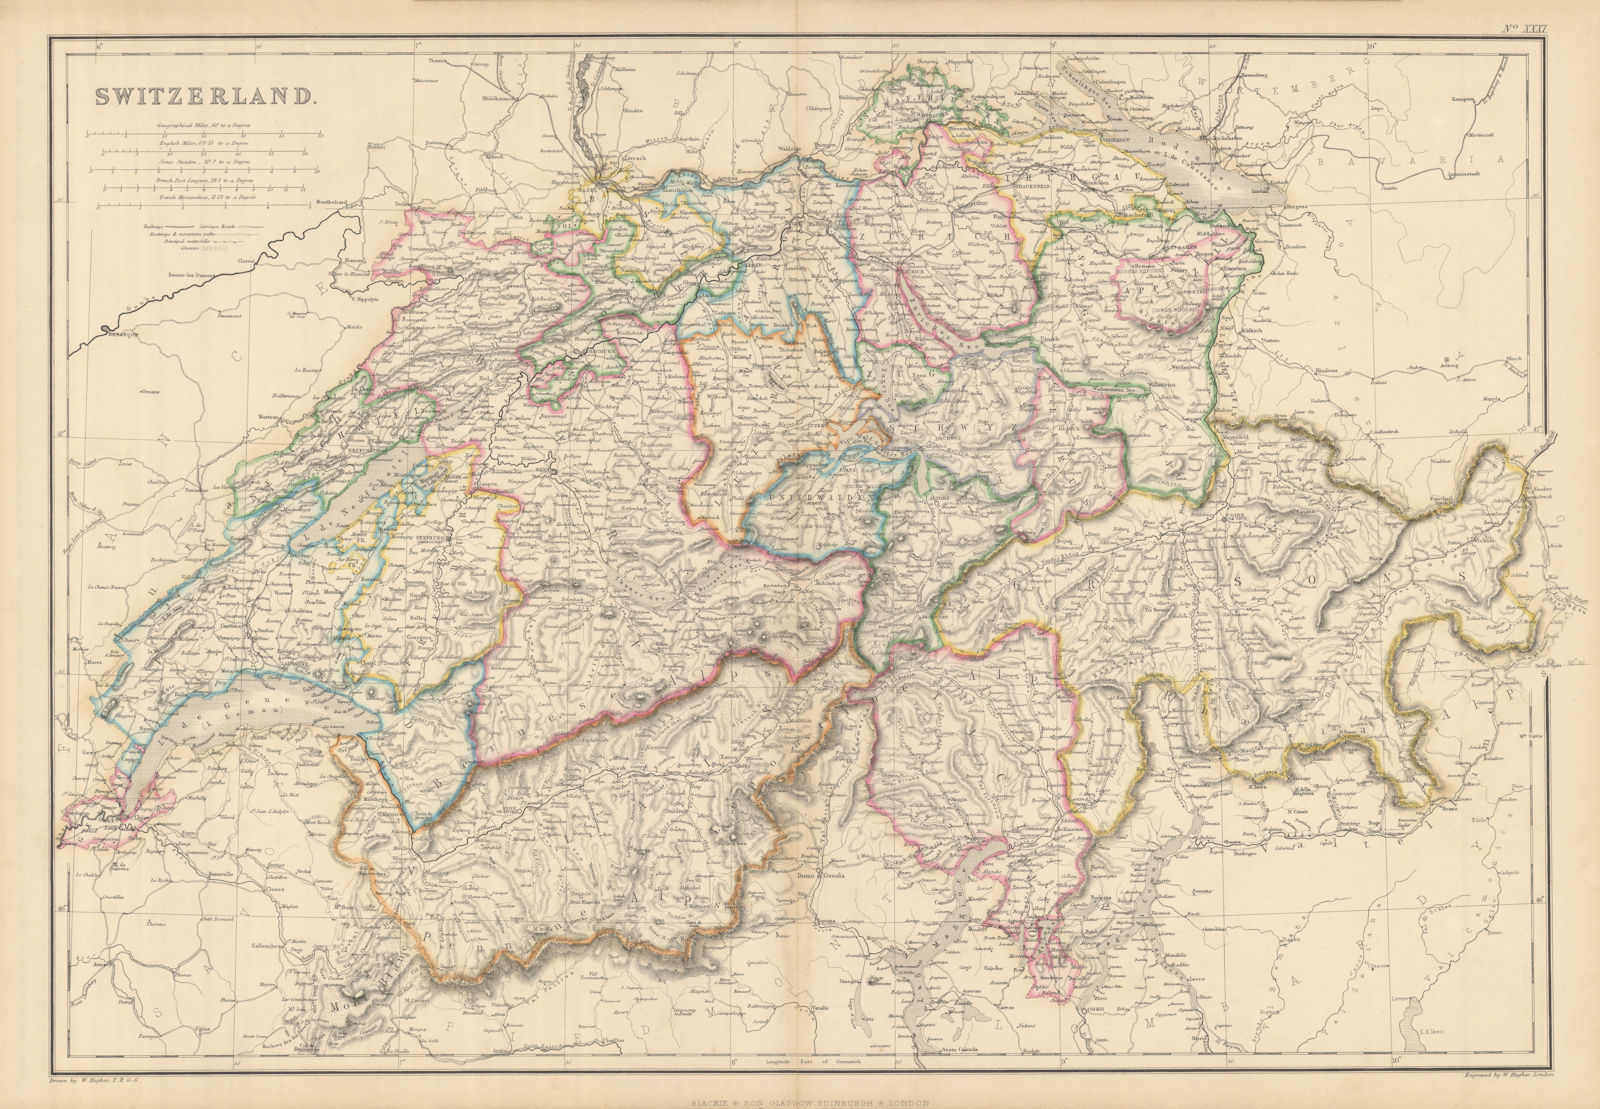 Associate Product Switzerland in cantons by William Hughes. Glaciers 1860 old antique map chart